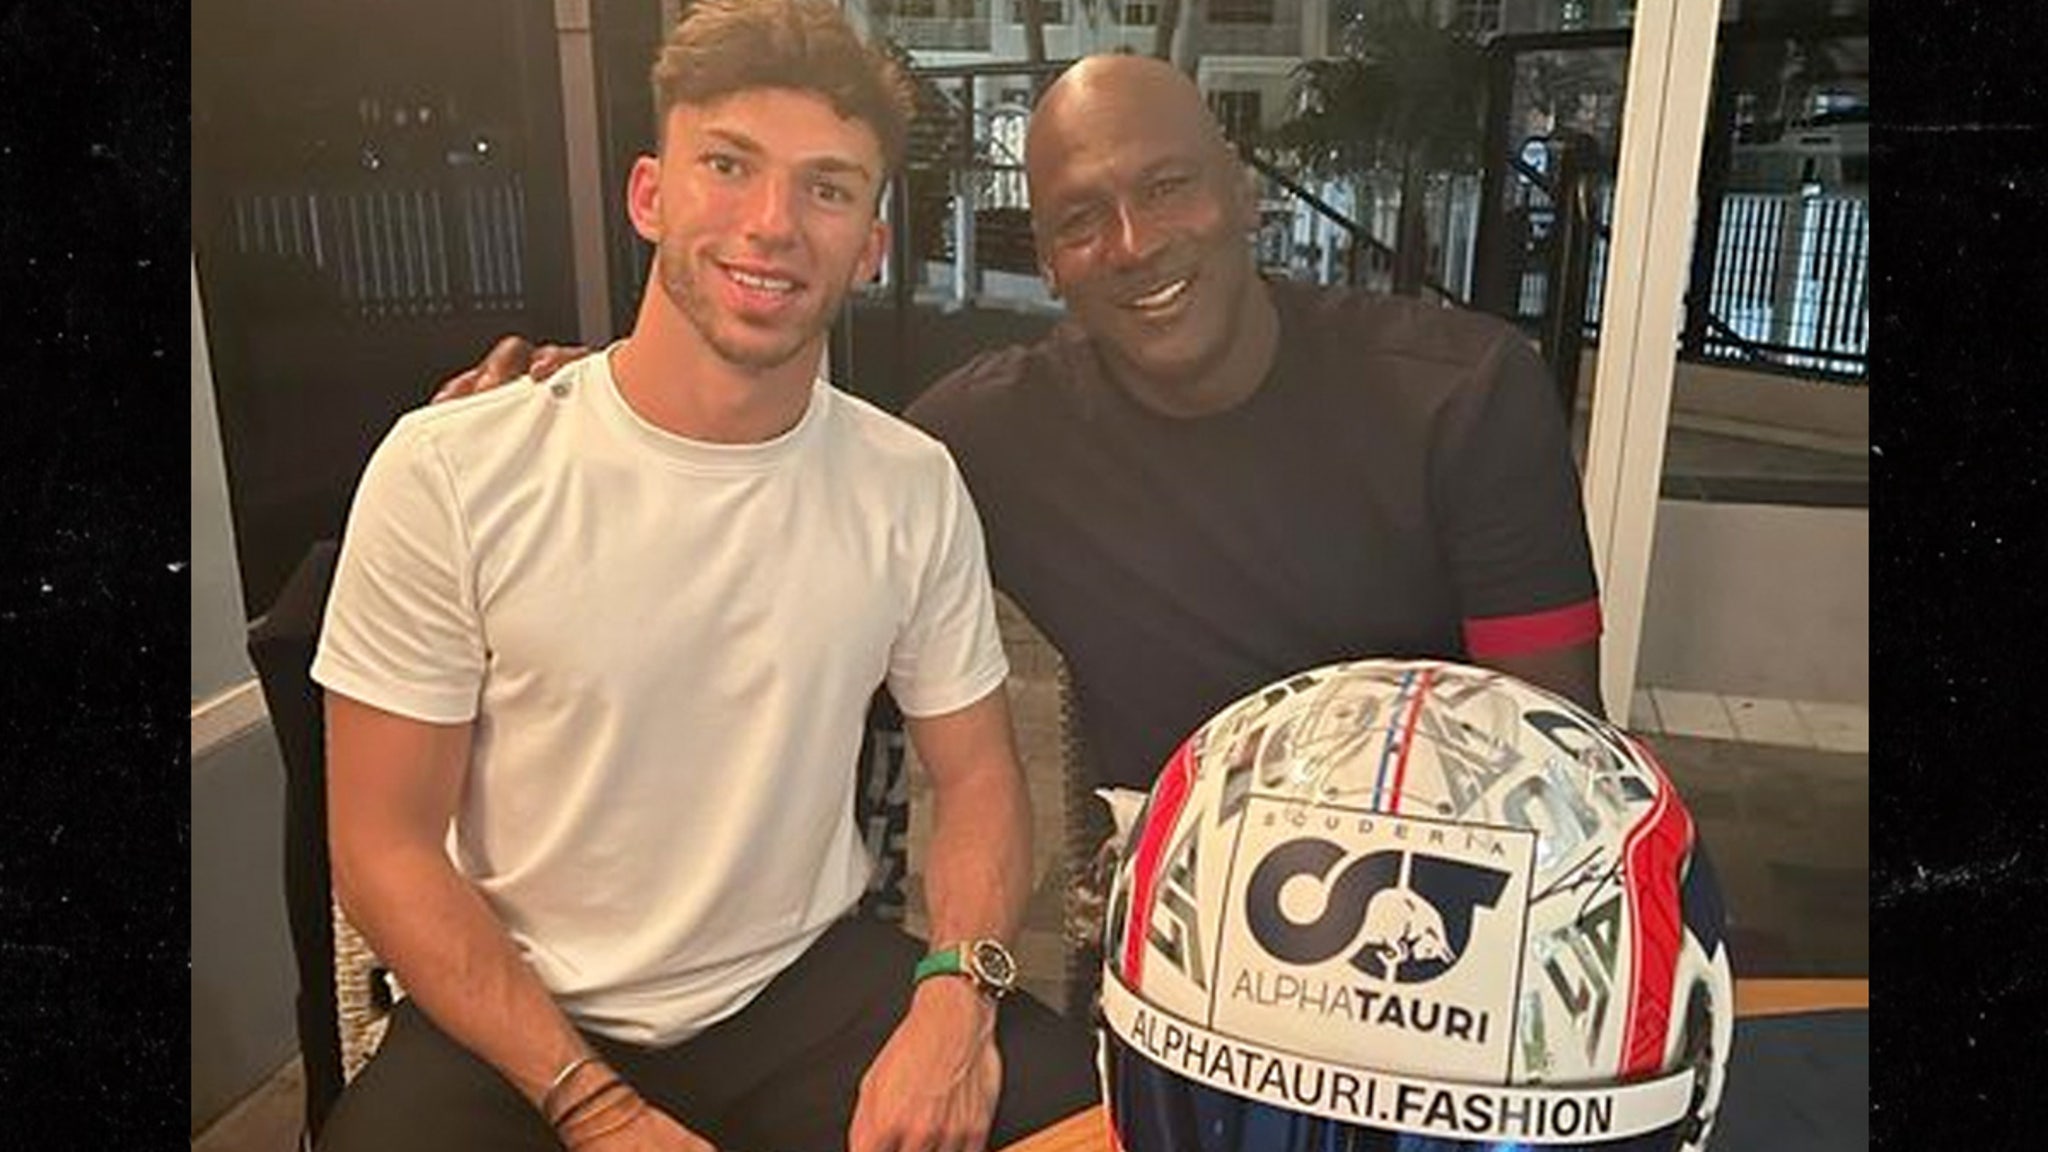 Michael Jordan And F1 Star Pierre Gasly Bro Down At Dinner In Miami